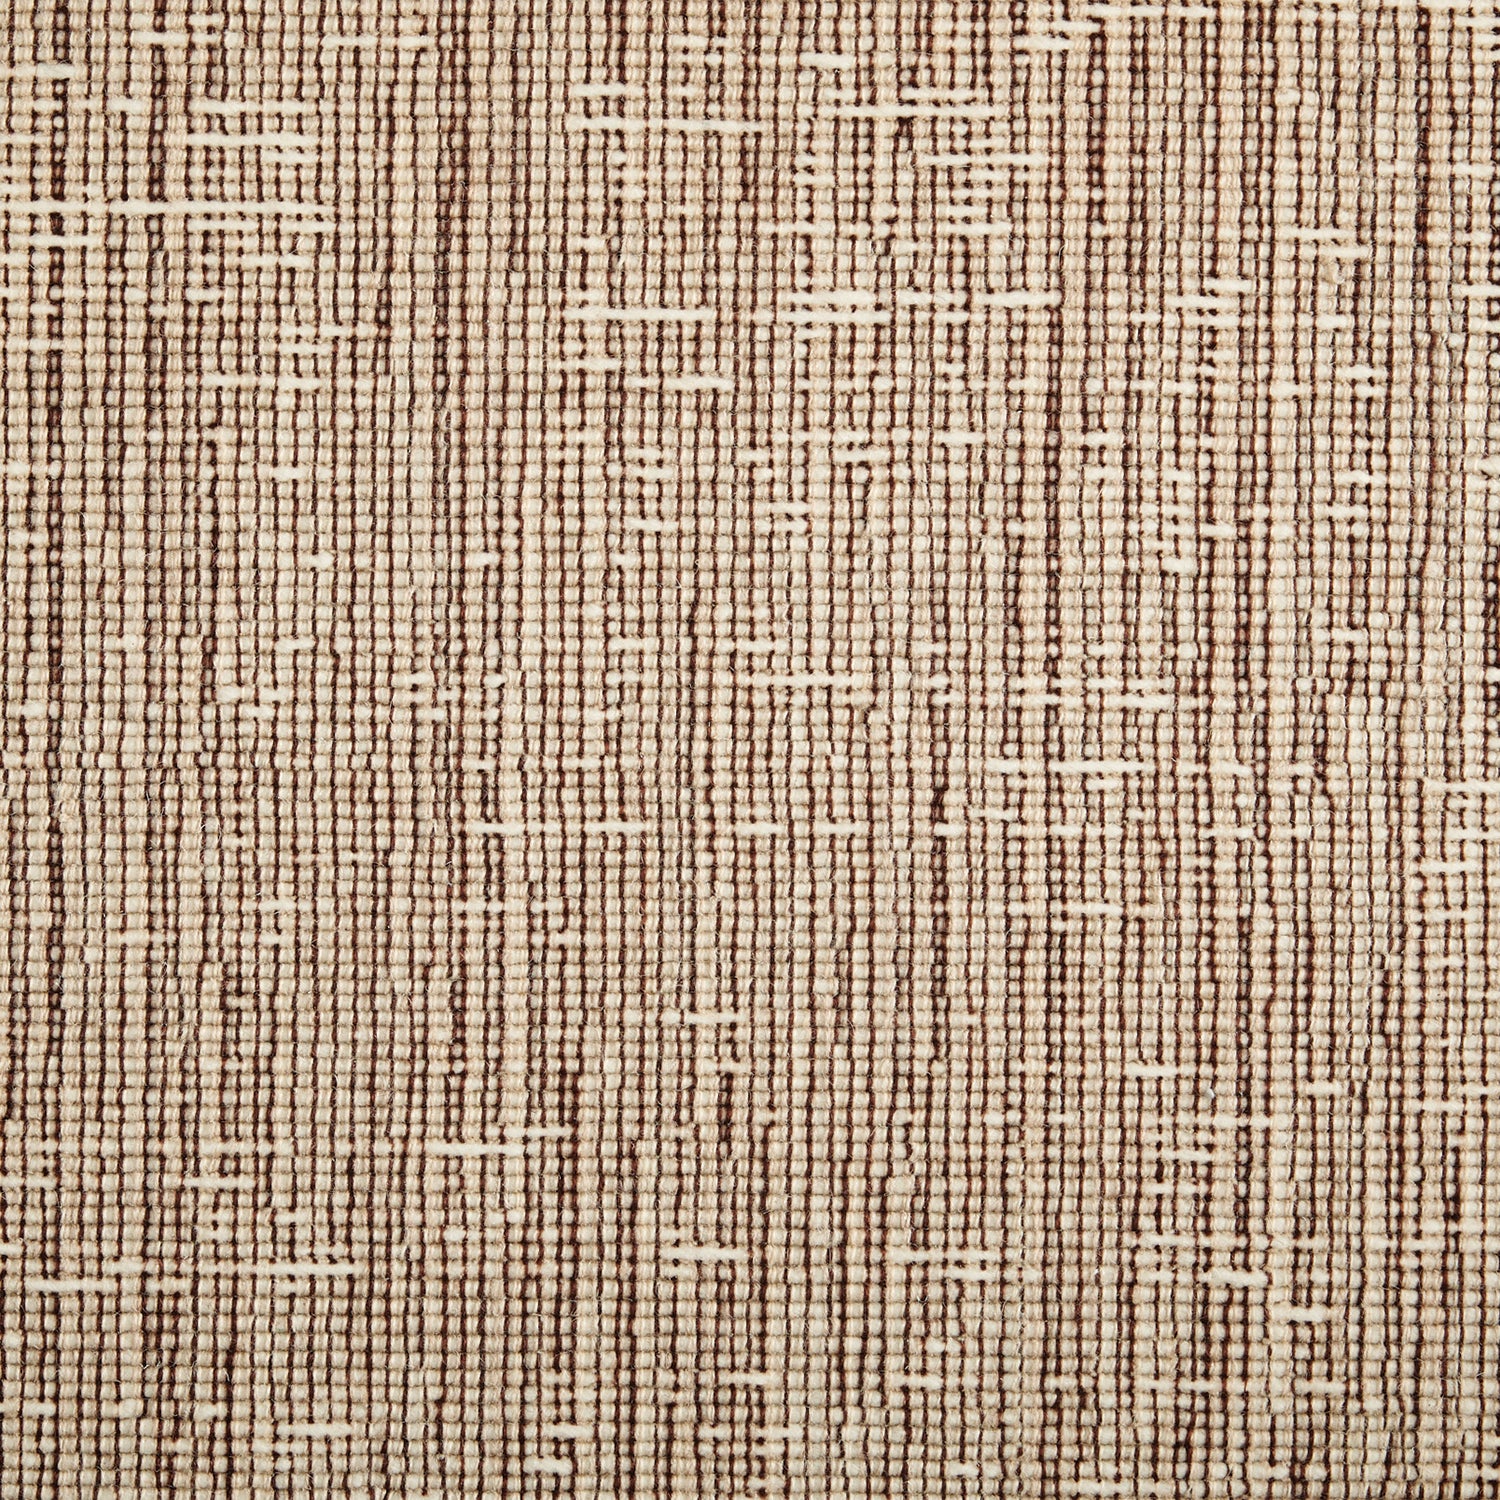 Wool broadloom carpet swatch in a chunky weave in mottled brown and cream.